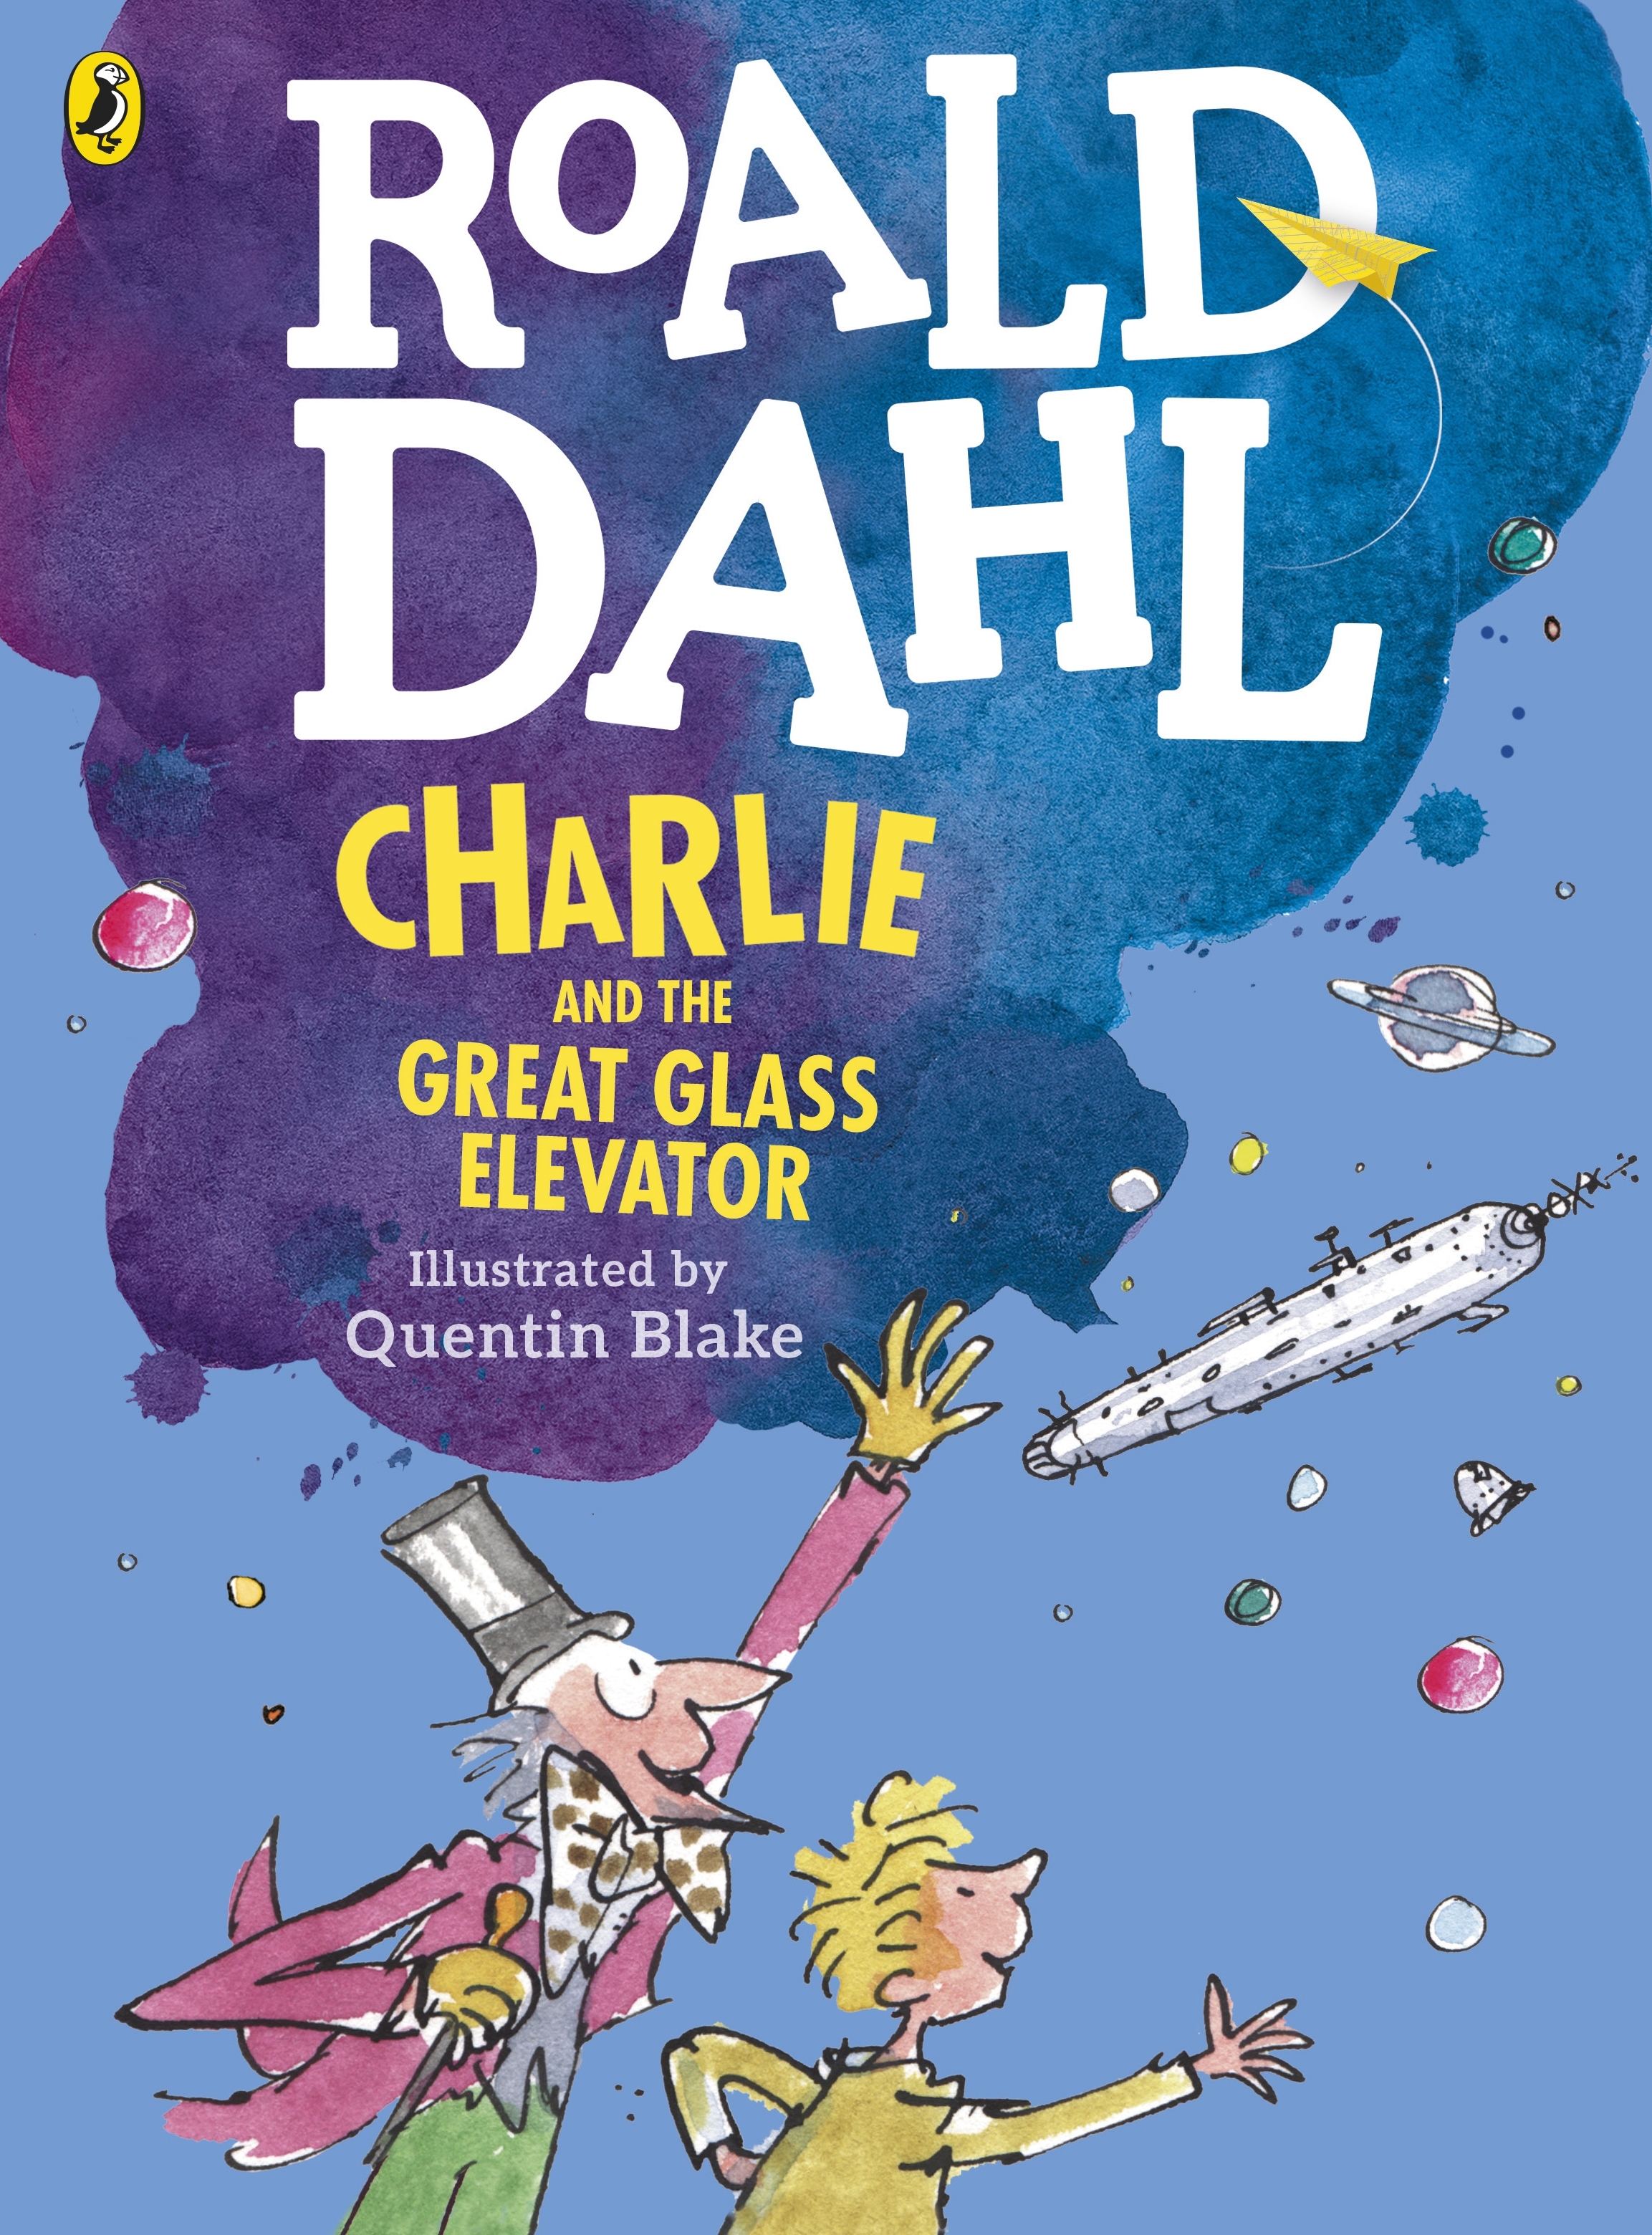 book review charlie and the great glass elevator